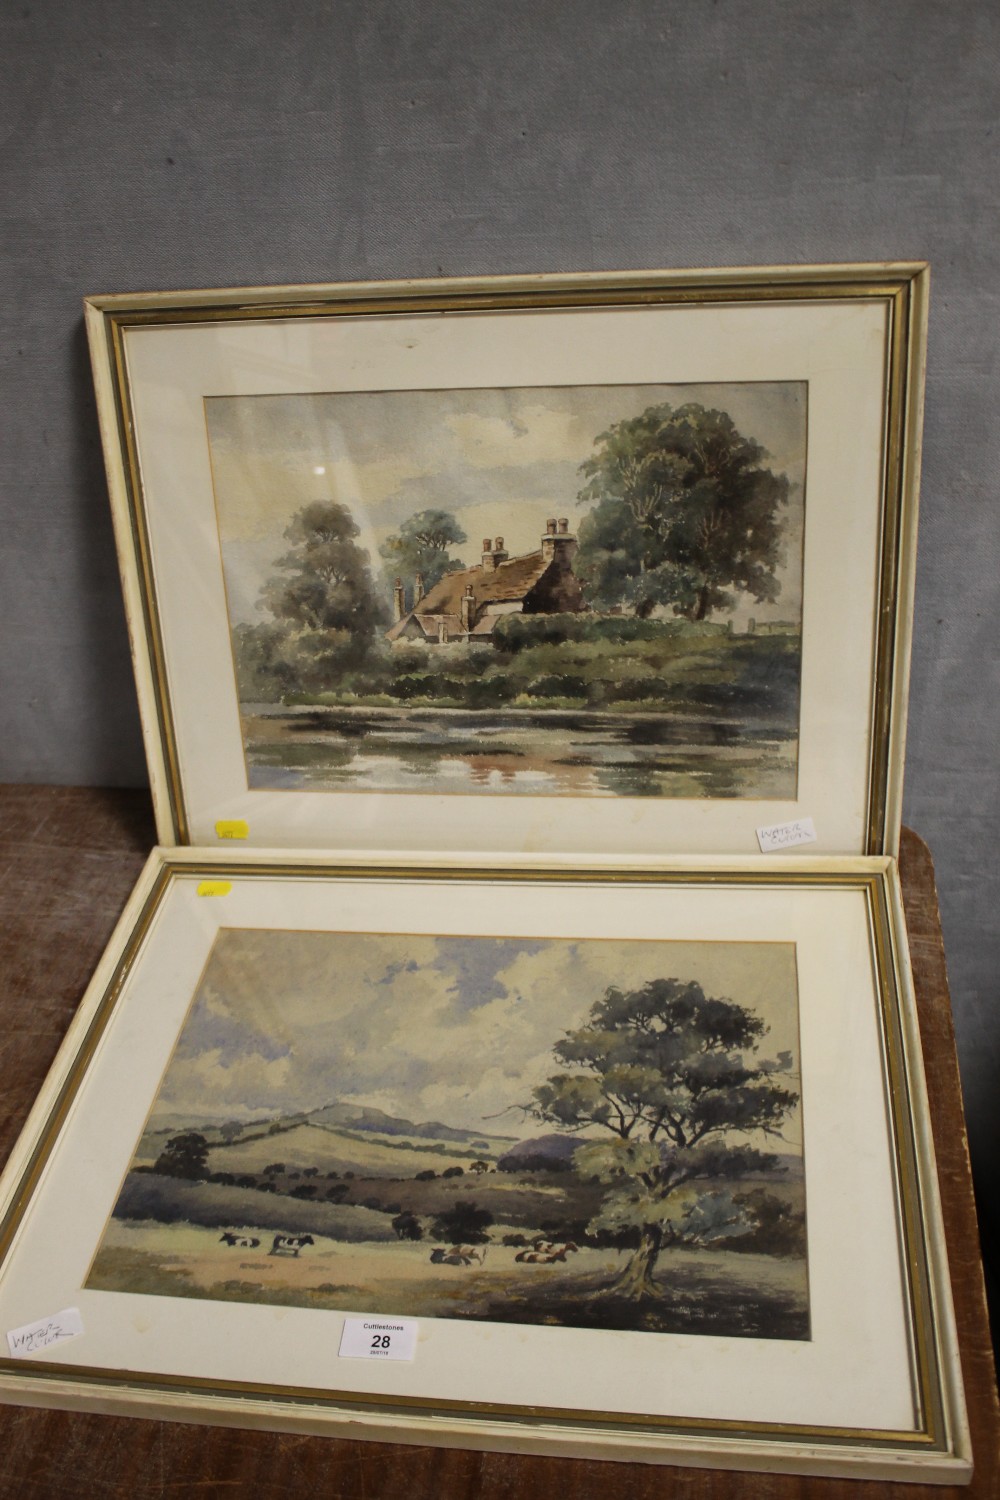 A PAIR OF ENGLISH SCHOOL WATERCOLOURS DEPICTING COUNTRYSIDE SCENES (2)